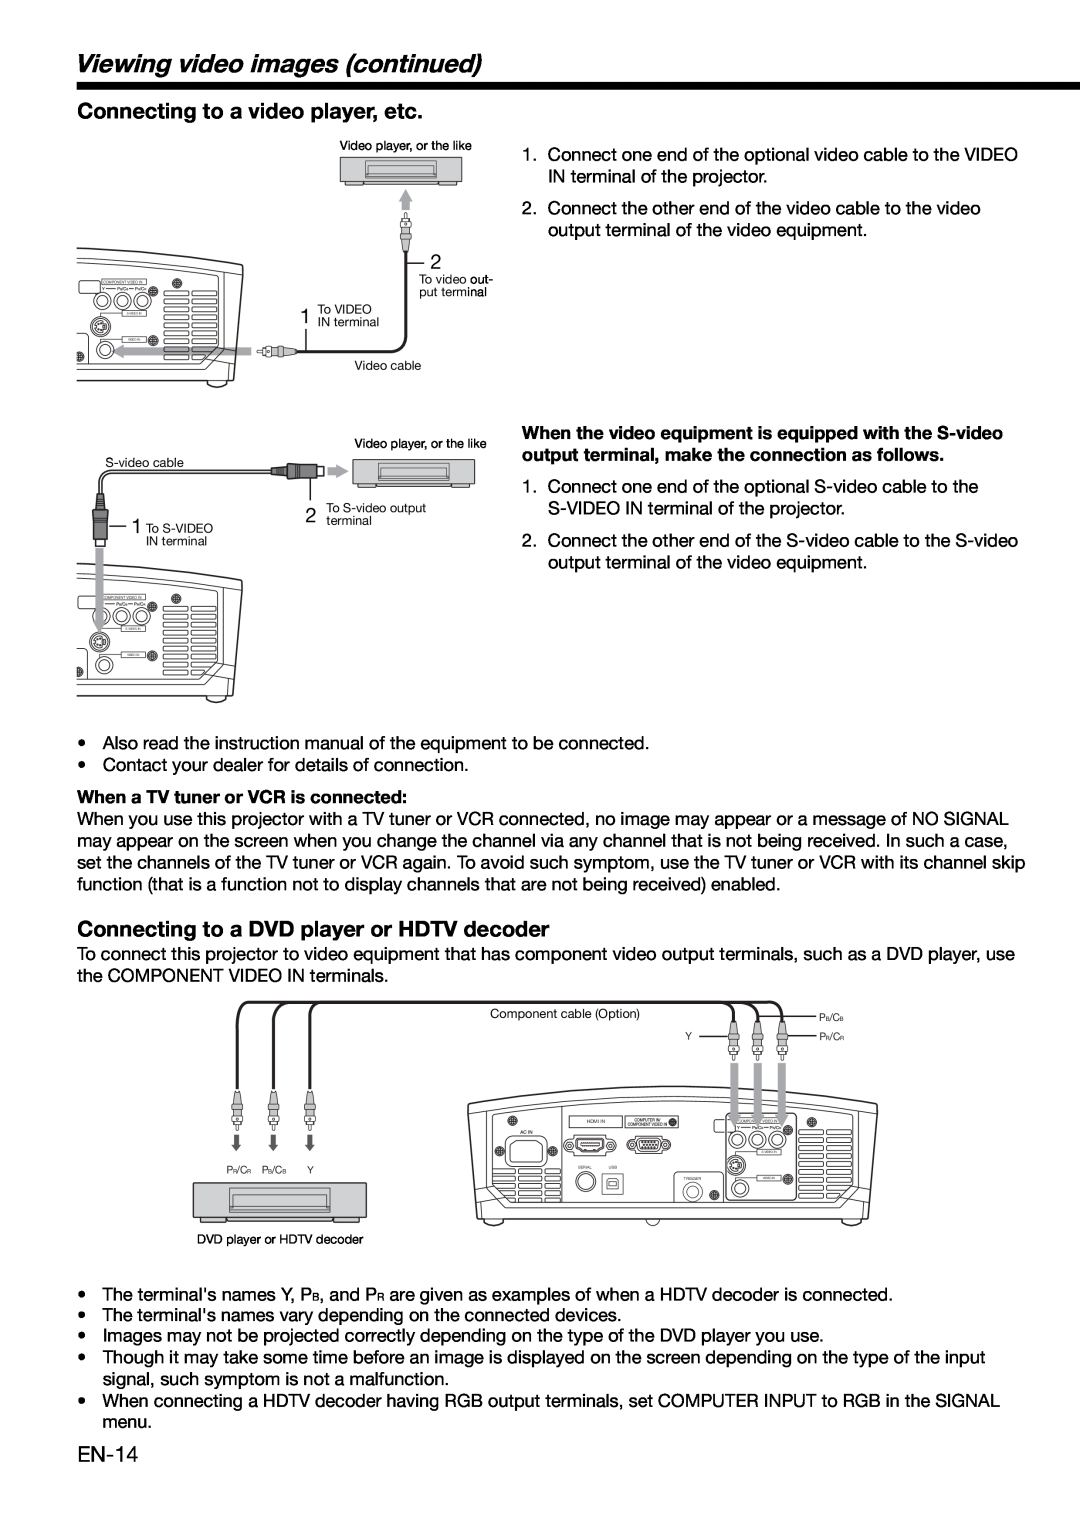 Mitsubishi Electronics HC3000 user manual Viewing video images continued, Connecting to a video player, etc 